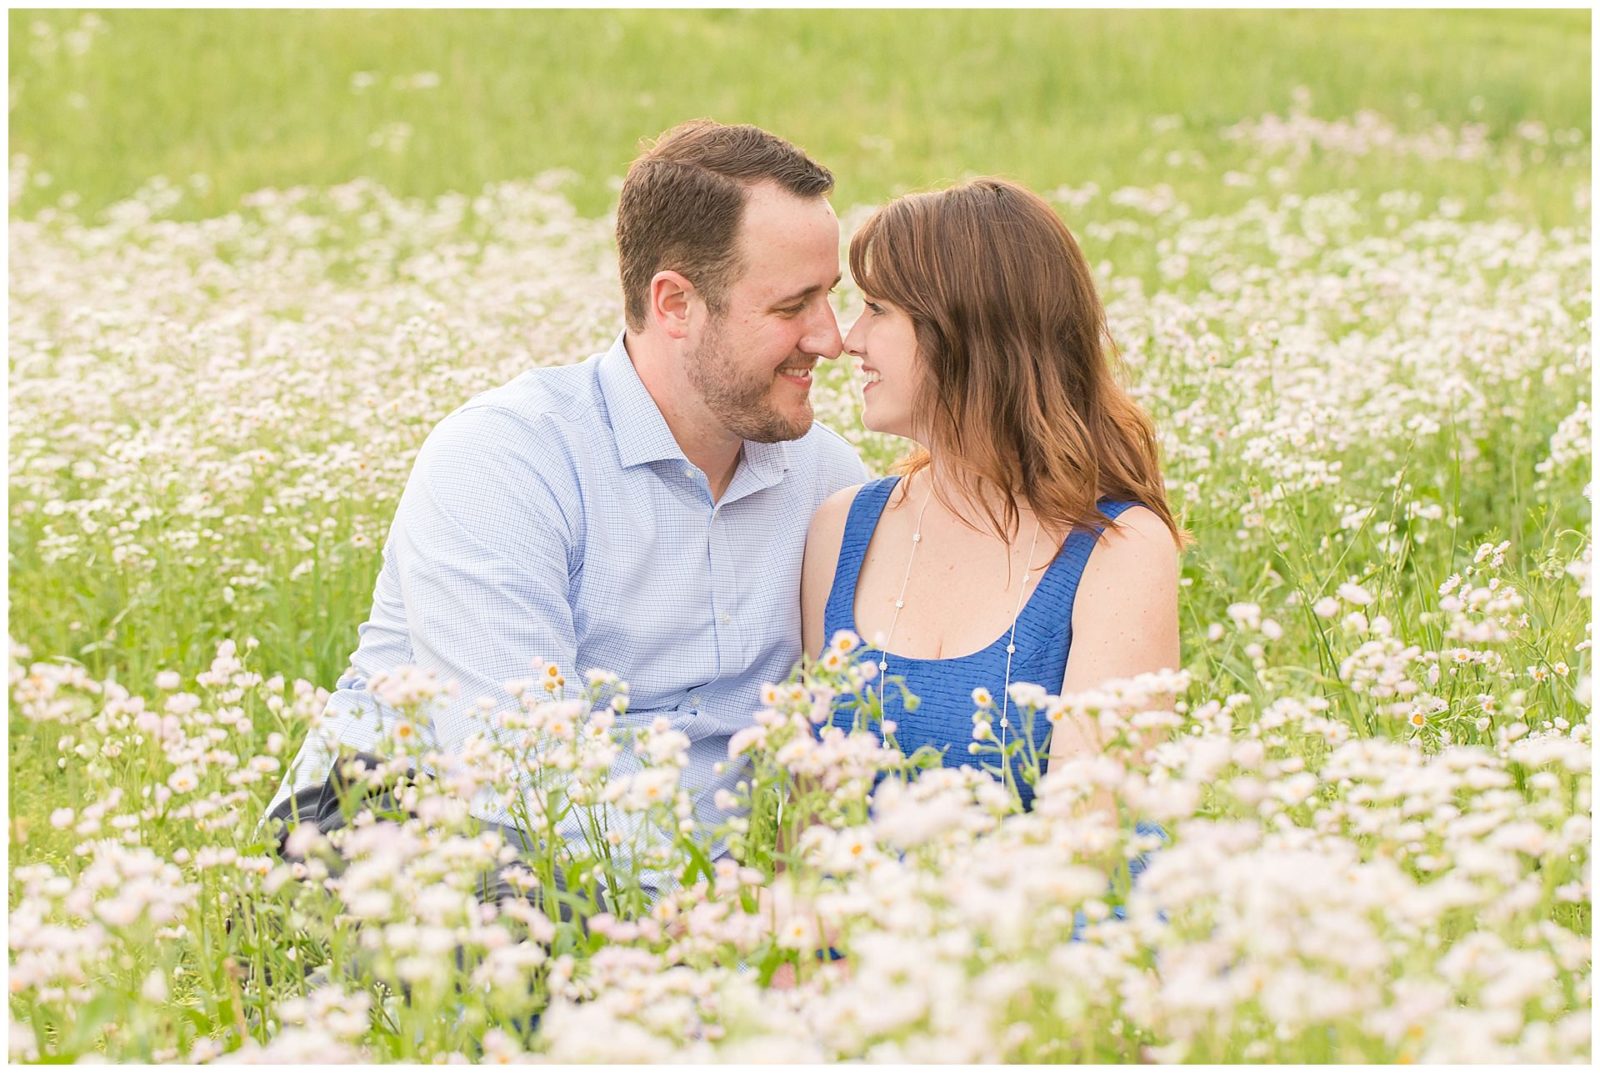 Couple sitting in a field of flowers during their engagement session at Shaker Village in Harrodsburg, KY